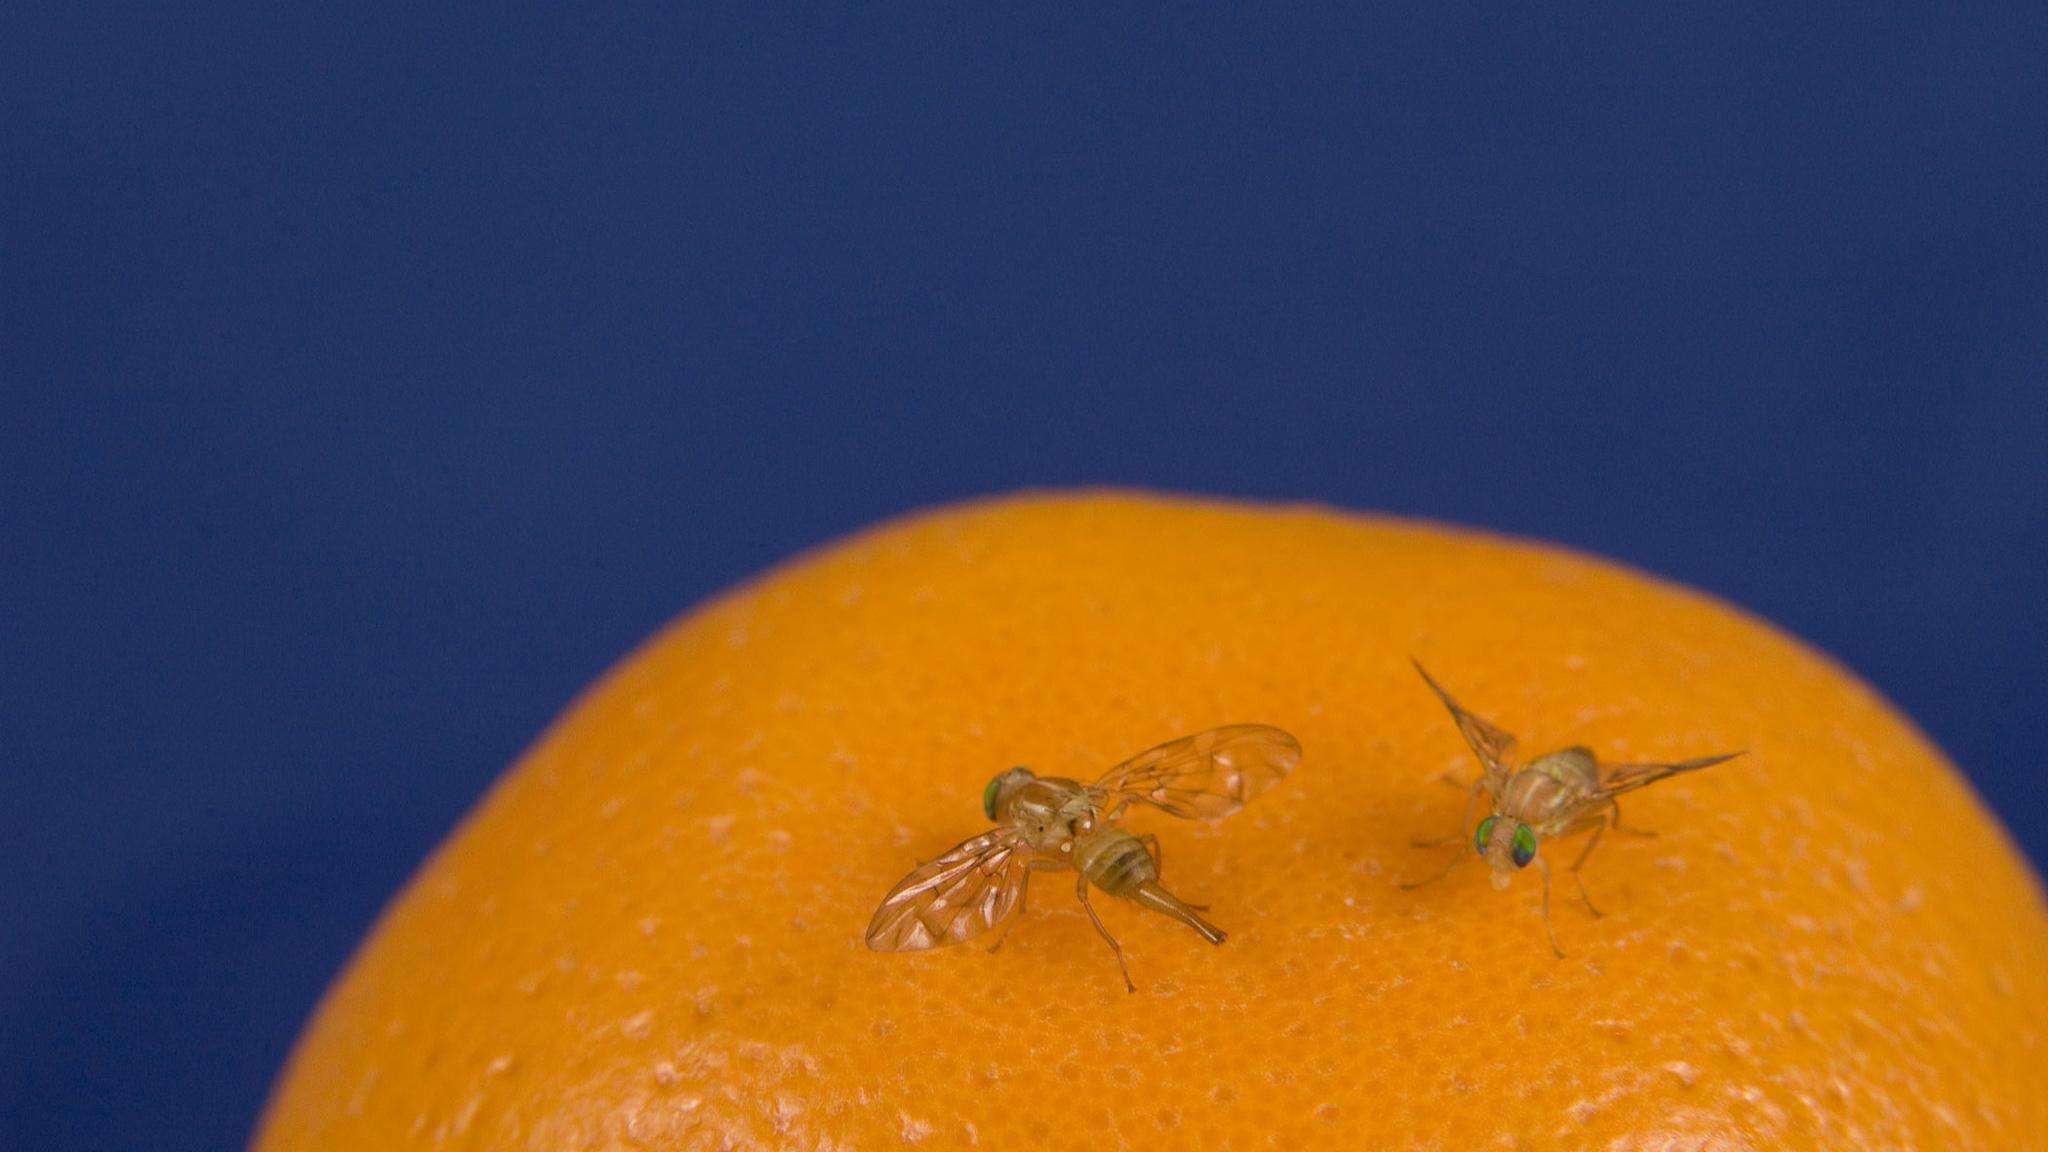 Two fruit flies with transparent wings on the surface of an orange.